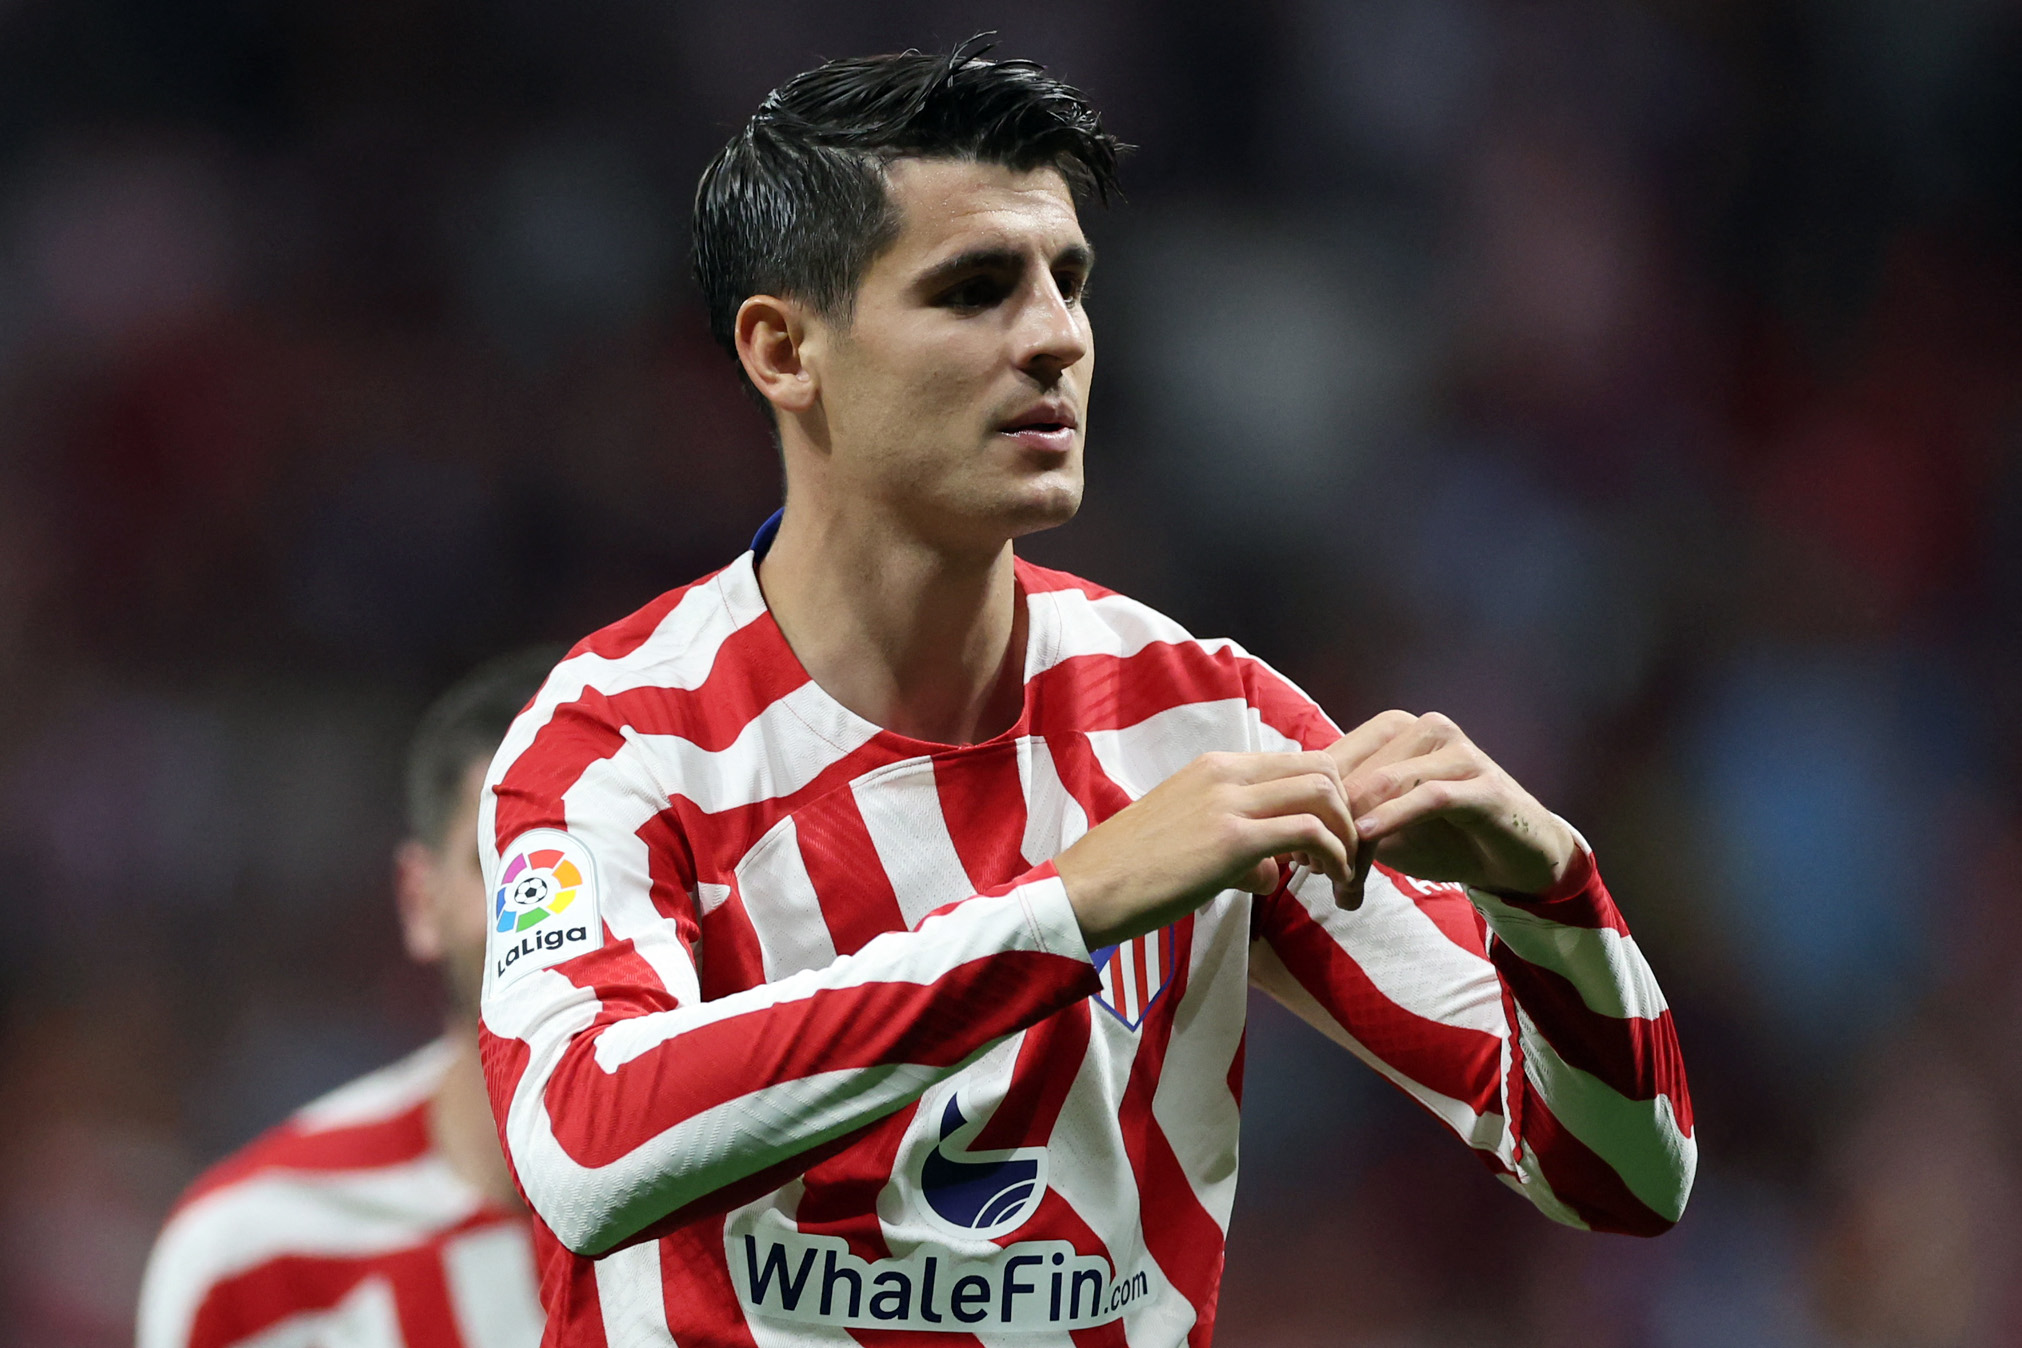 Juventus have routinely chased after Alvaro Morata after the last time he left Turin, and their interest hasn’t waned. He has a short-term deal.